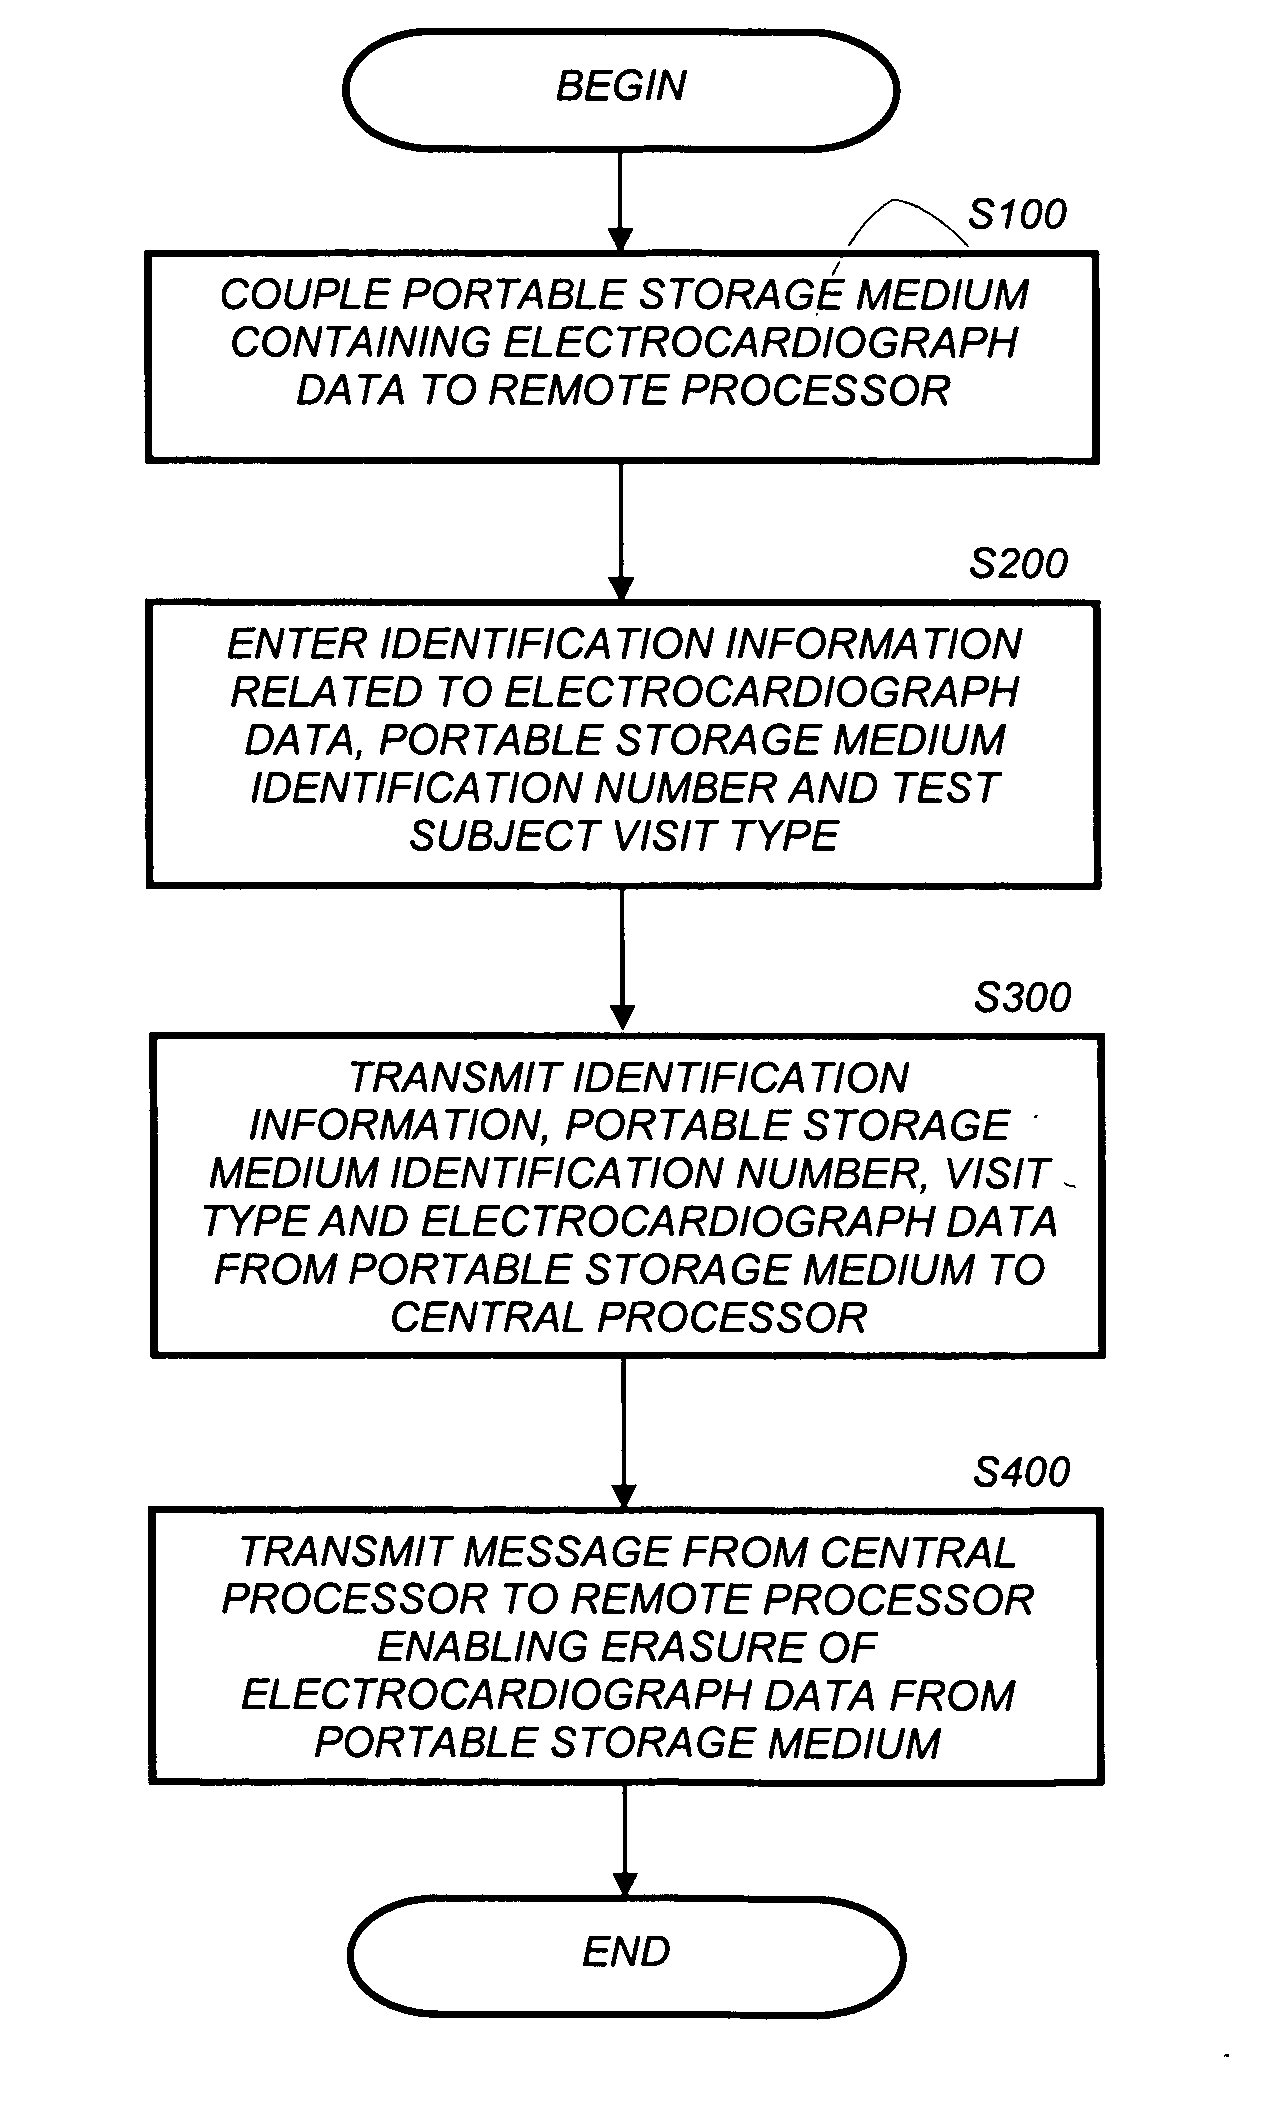 Method and apparatus for transfer of captured electrocardiogram data